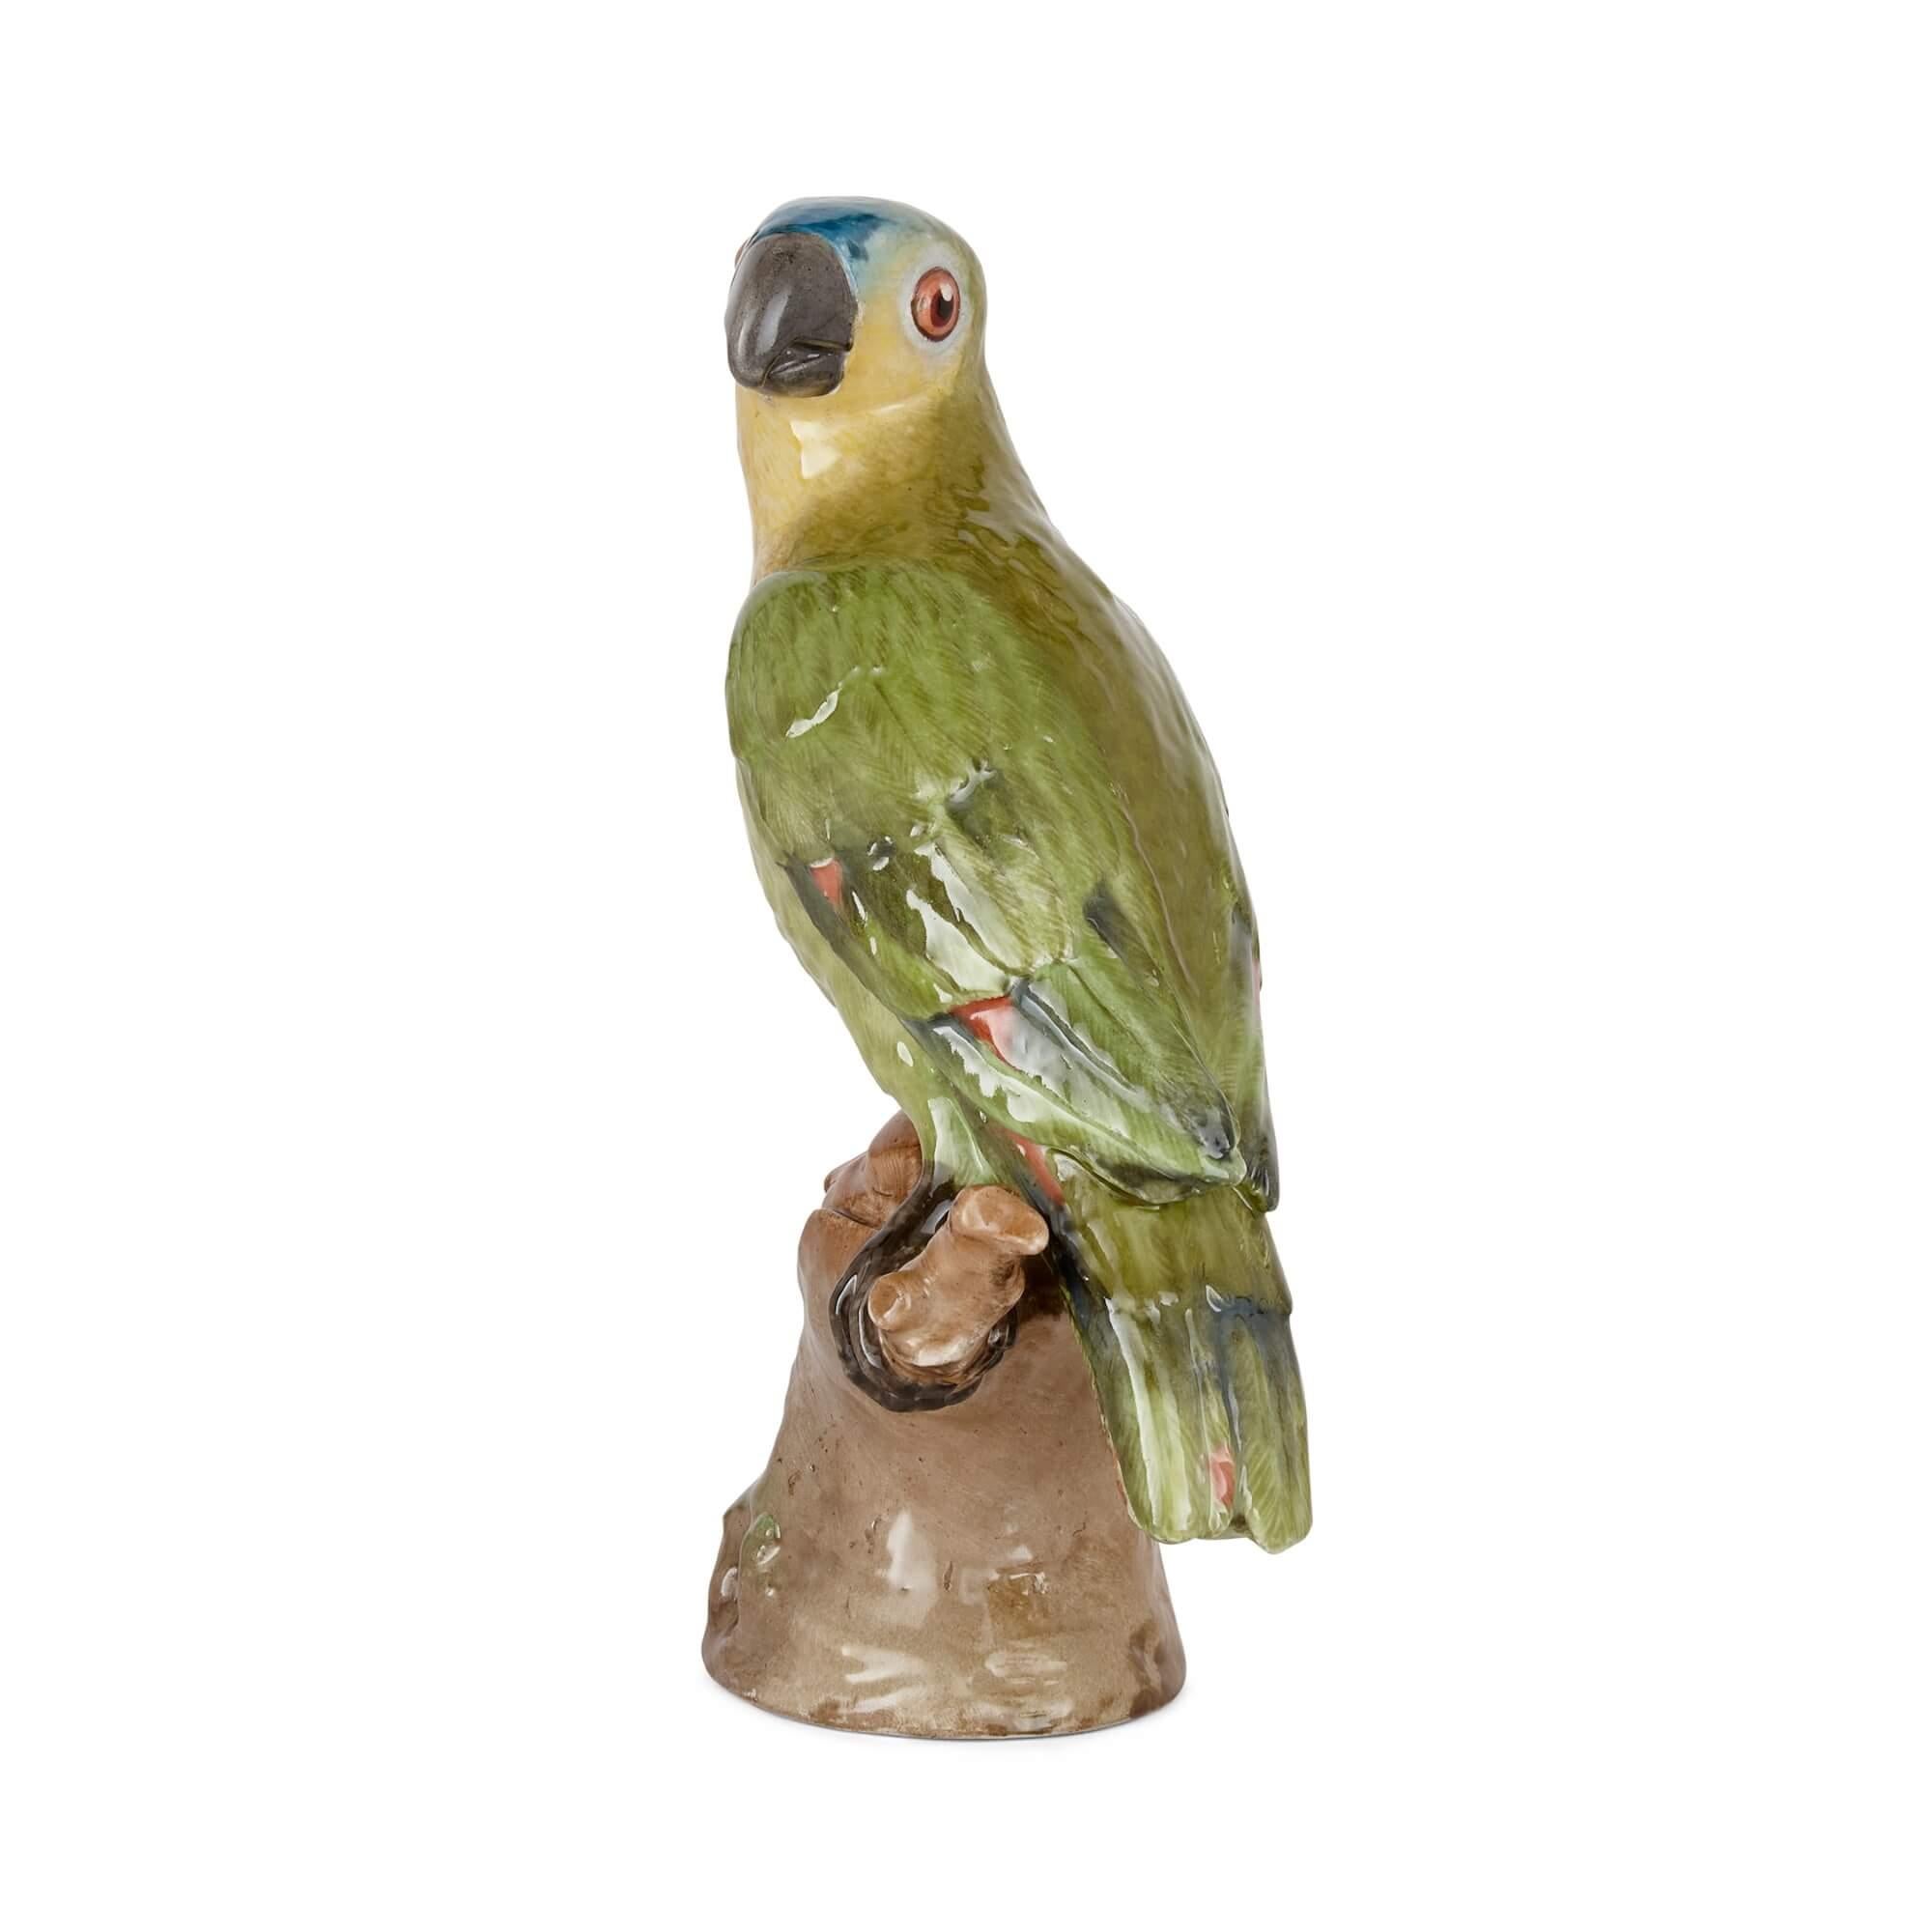 A KPM porcelain model of a parrot
German, late 19th century 
Measures: Height 23cm, width 12cm, depth 9cm

Marked for KPM, the leading German porcelain makers, this charming and delightful animal sculpture is a late nineteenth century painted